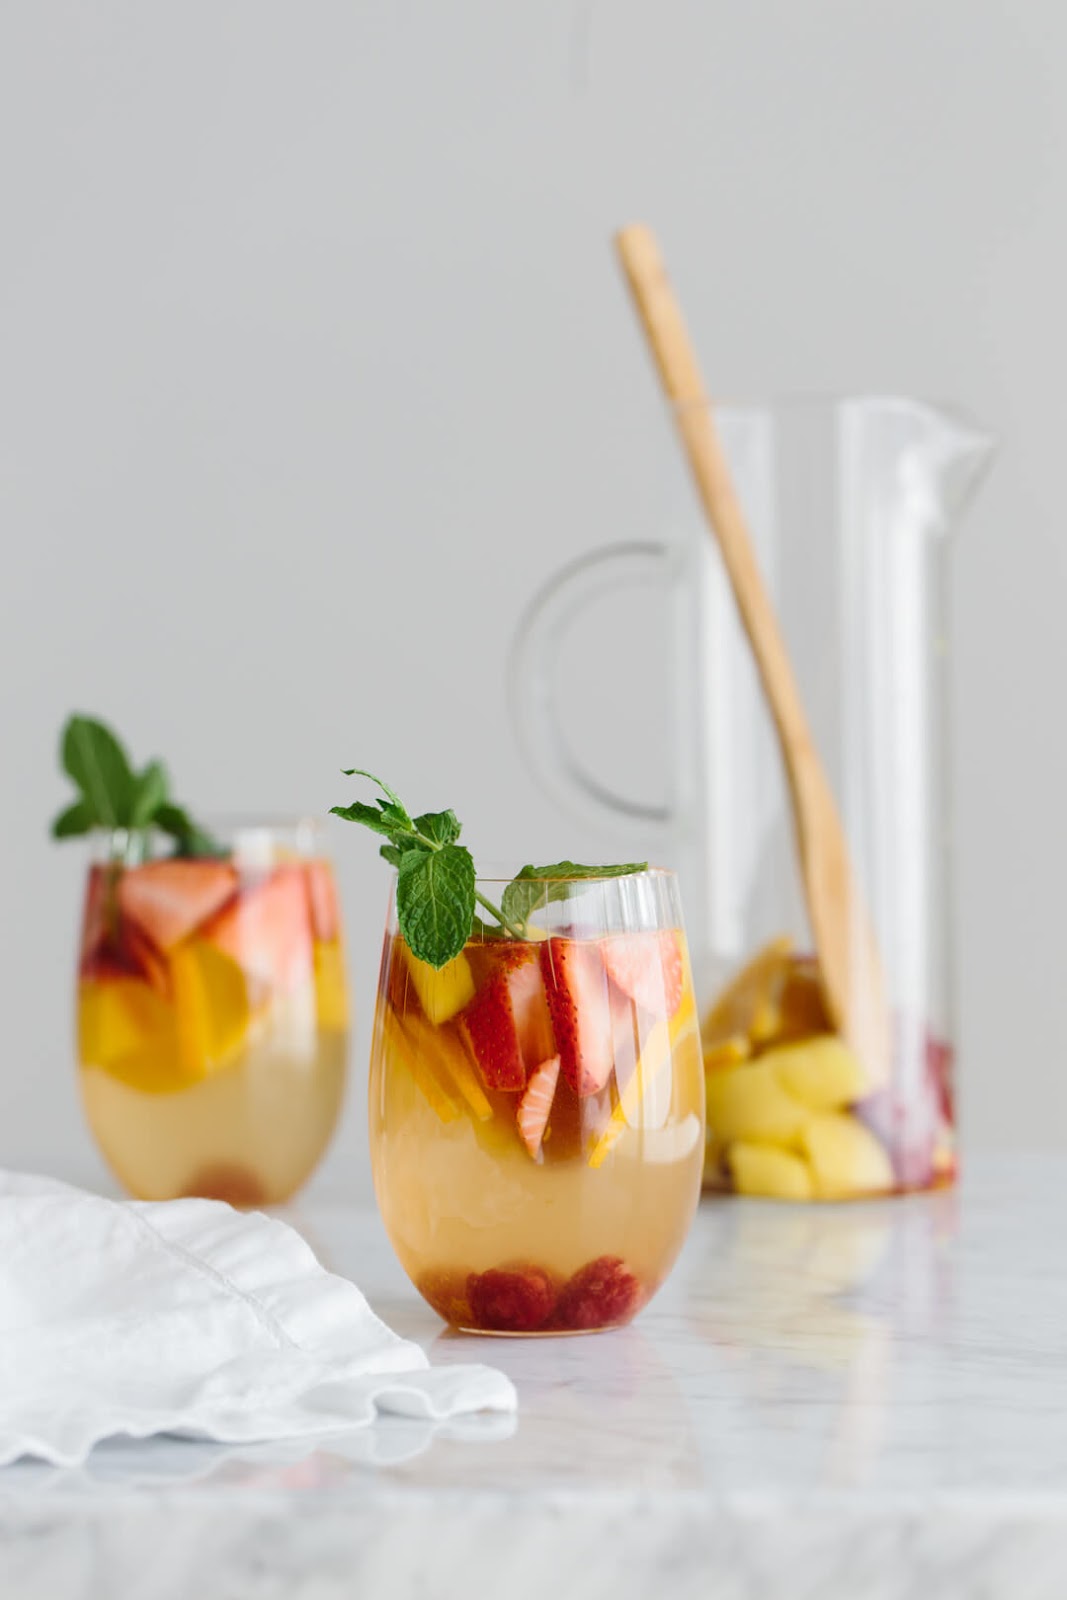 WHITE SANGRIA WITH MANGO AND BERRIES #sangria #drink #mango #cocktail #party